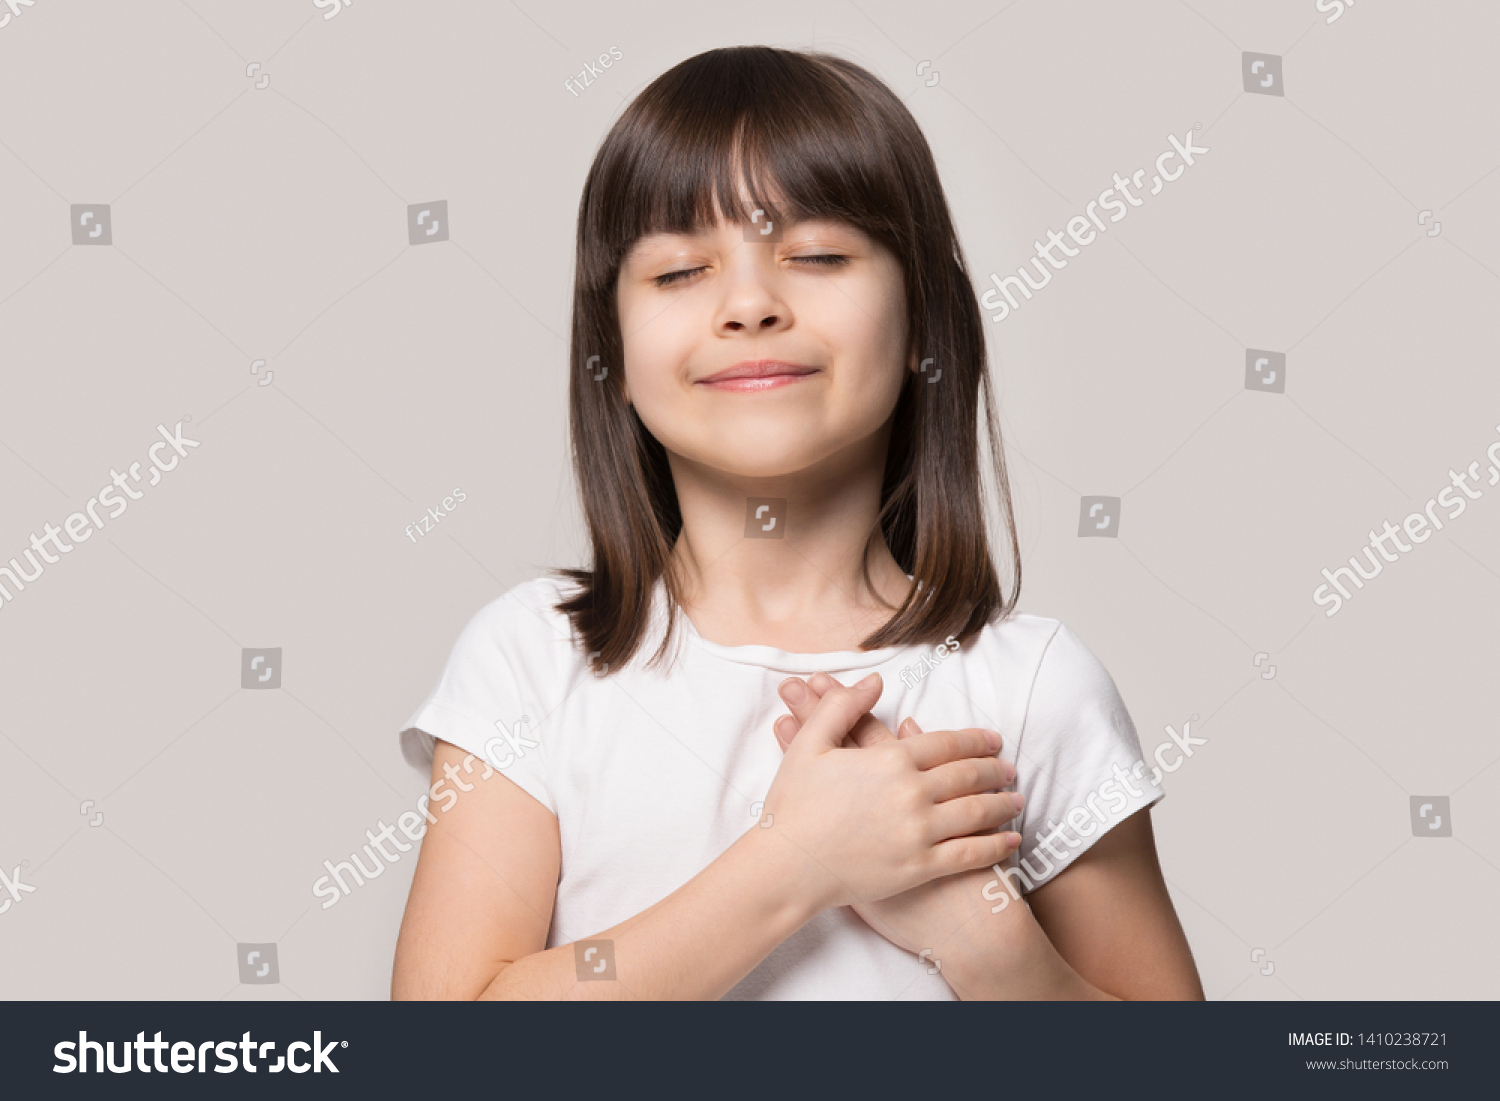 Little sincere adorable girl closed eyes holding hands on chest feeling gratitude pose isolated on sandy color beige background, arms on heart gesture of love appreciation gratitude, adoption concept #1410238721